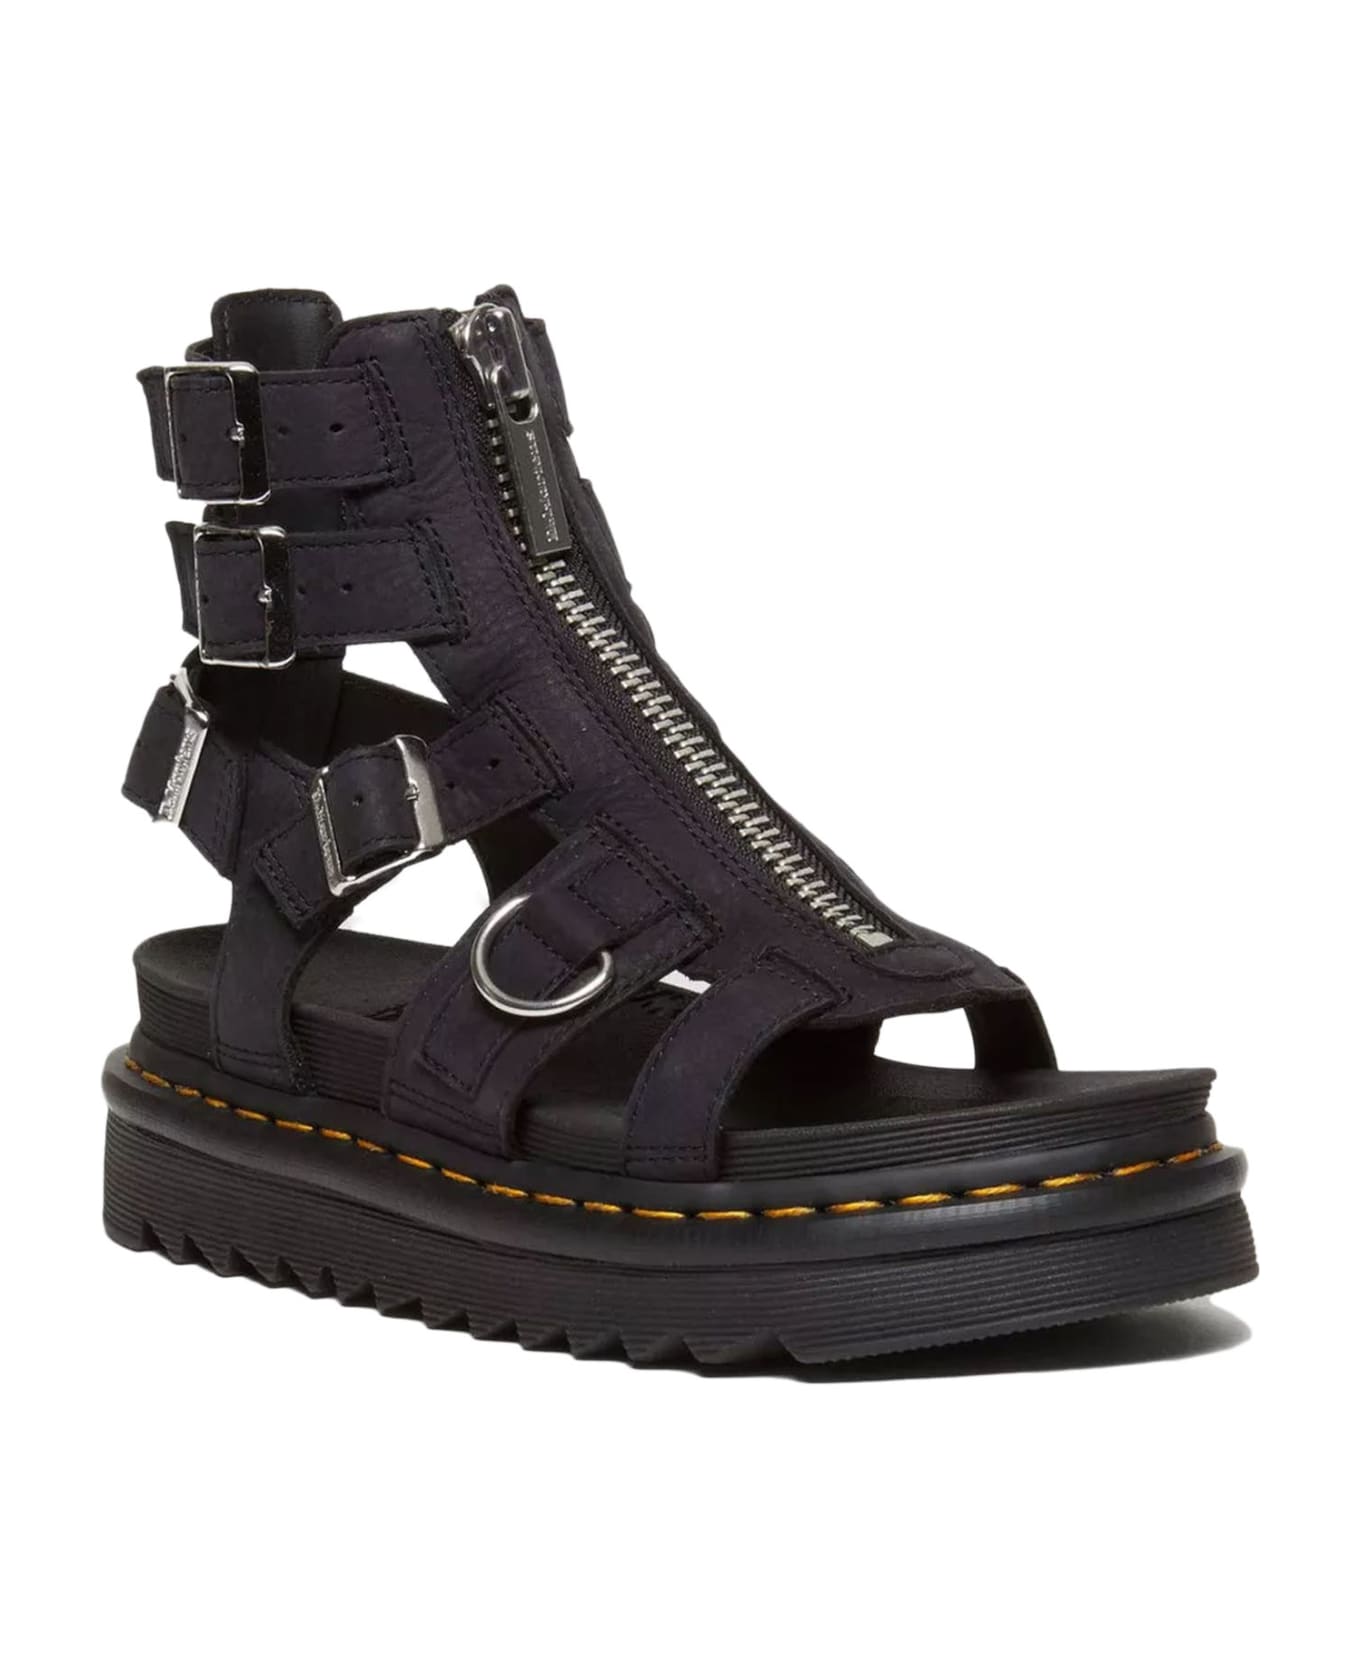 Dr. Martens Olson Sandals In Charcoal Grey Tumbled Nubuck - Black